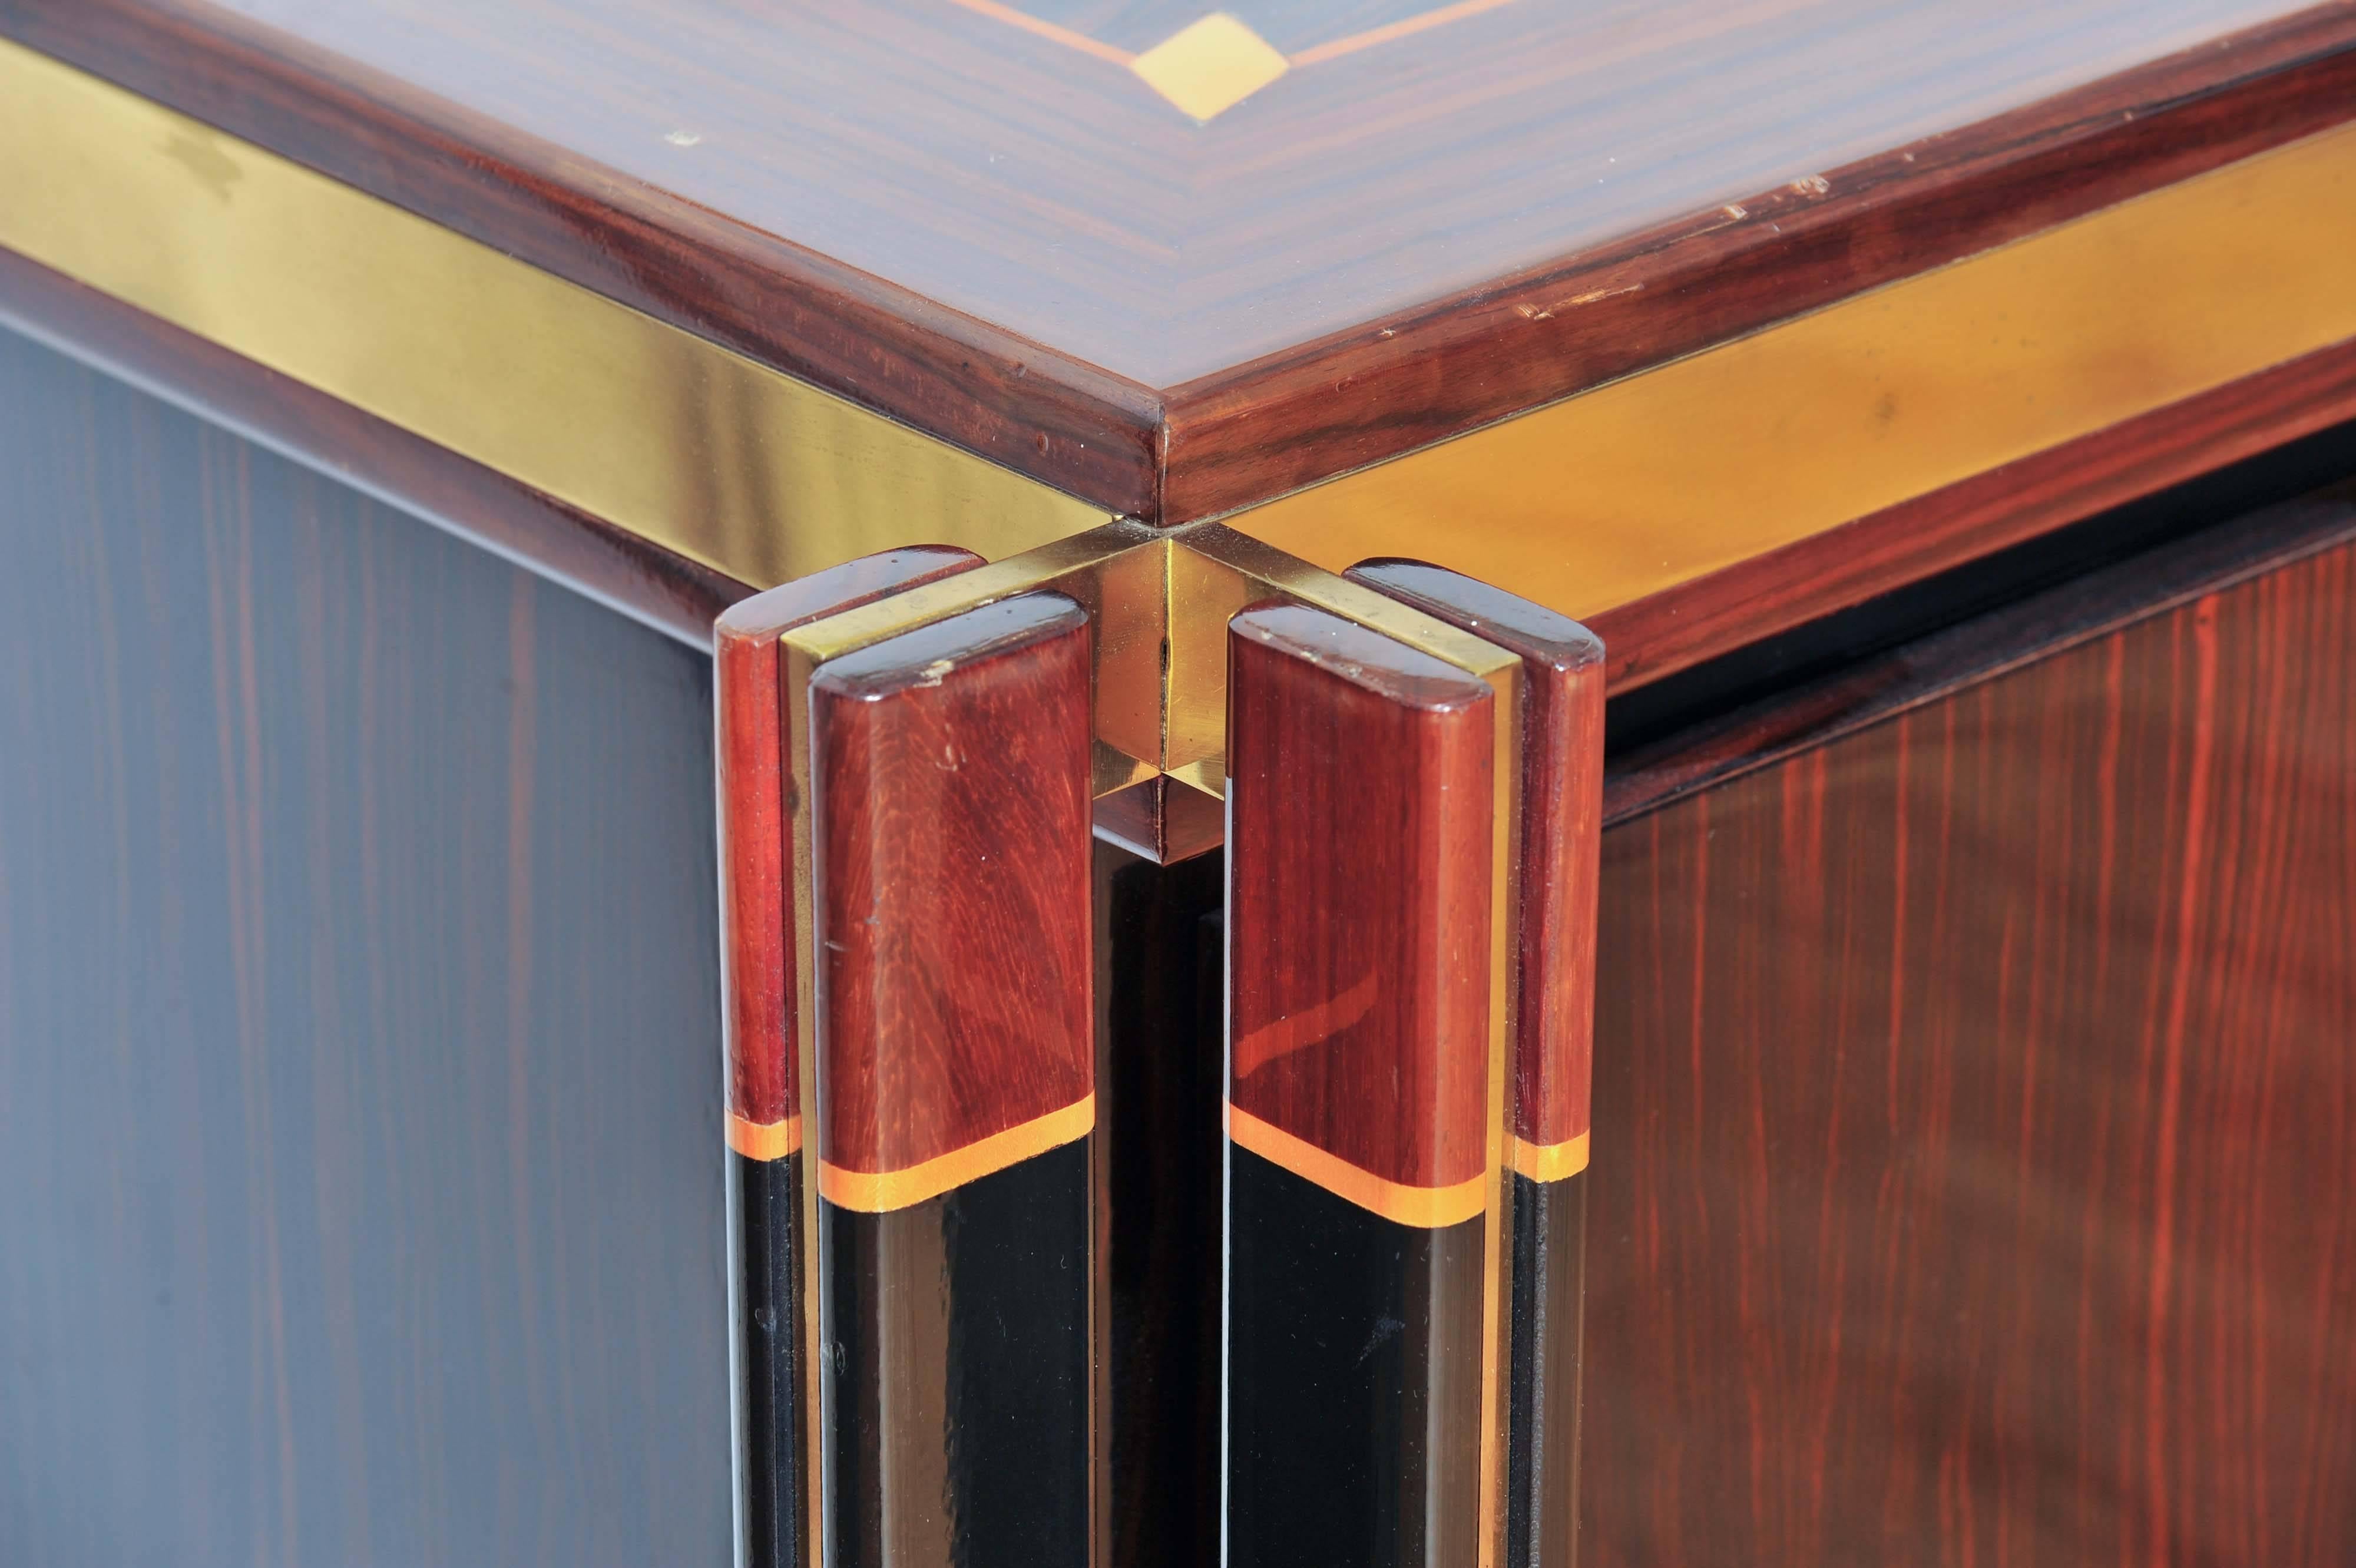 Madagascar wood sideboard is decorated with patterns of contrasting veneers and light fruit wood inlays and brass lines. The credenza is edged with brass borders, emphasizing its geometric lines with the structure in wood and brass in the four